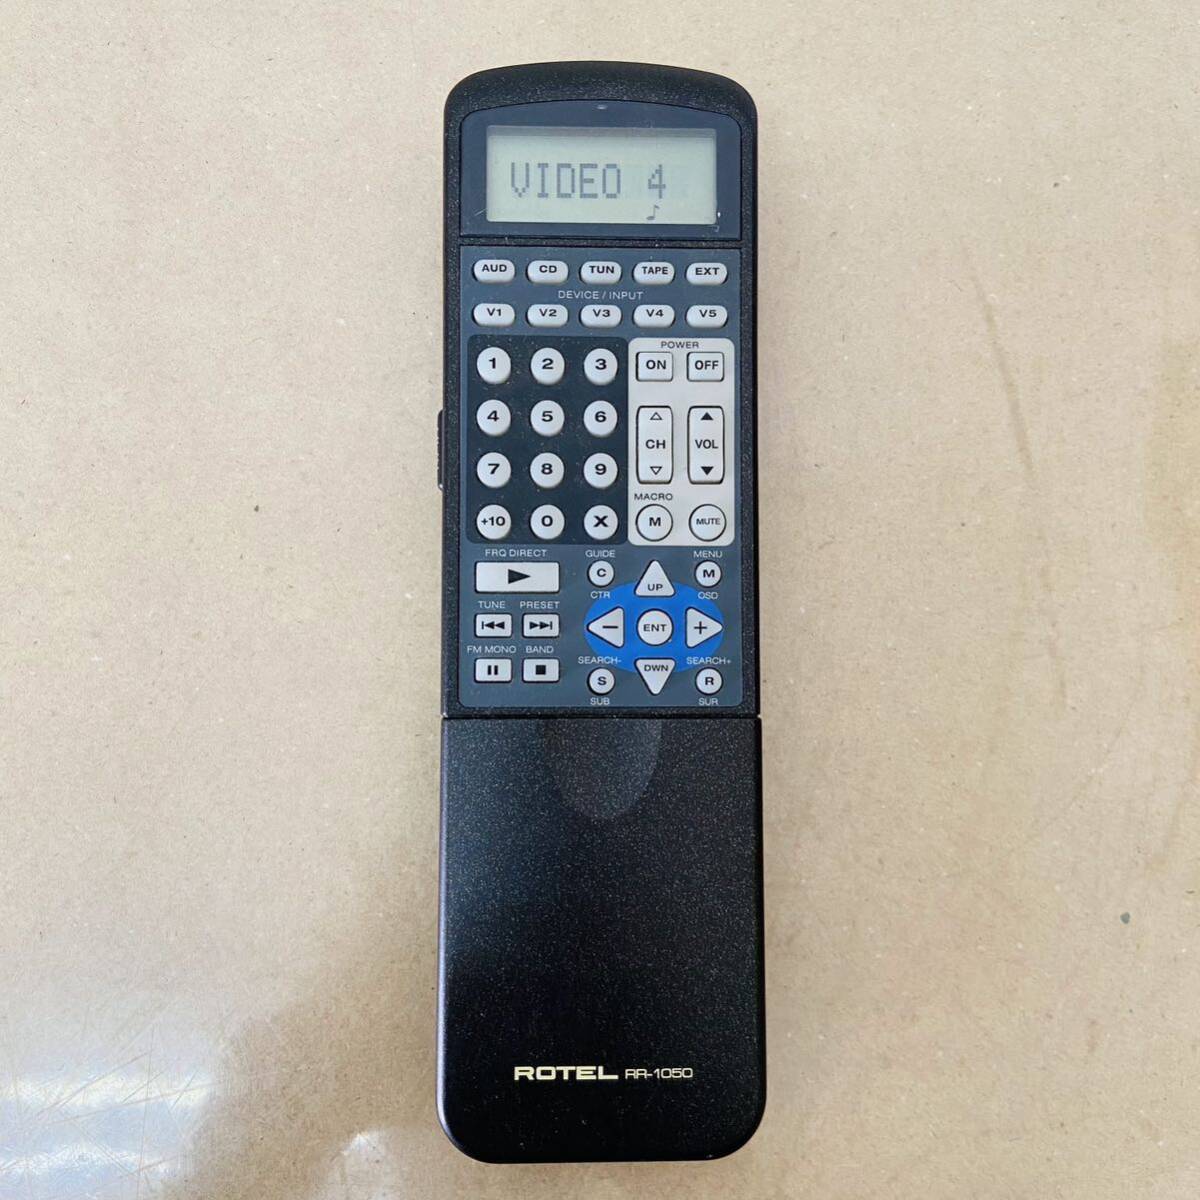 ROTEL RR-1050  Universal Learning Remote Control i18071 コンパクト発送 動作品 の画像1